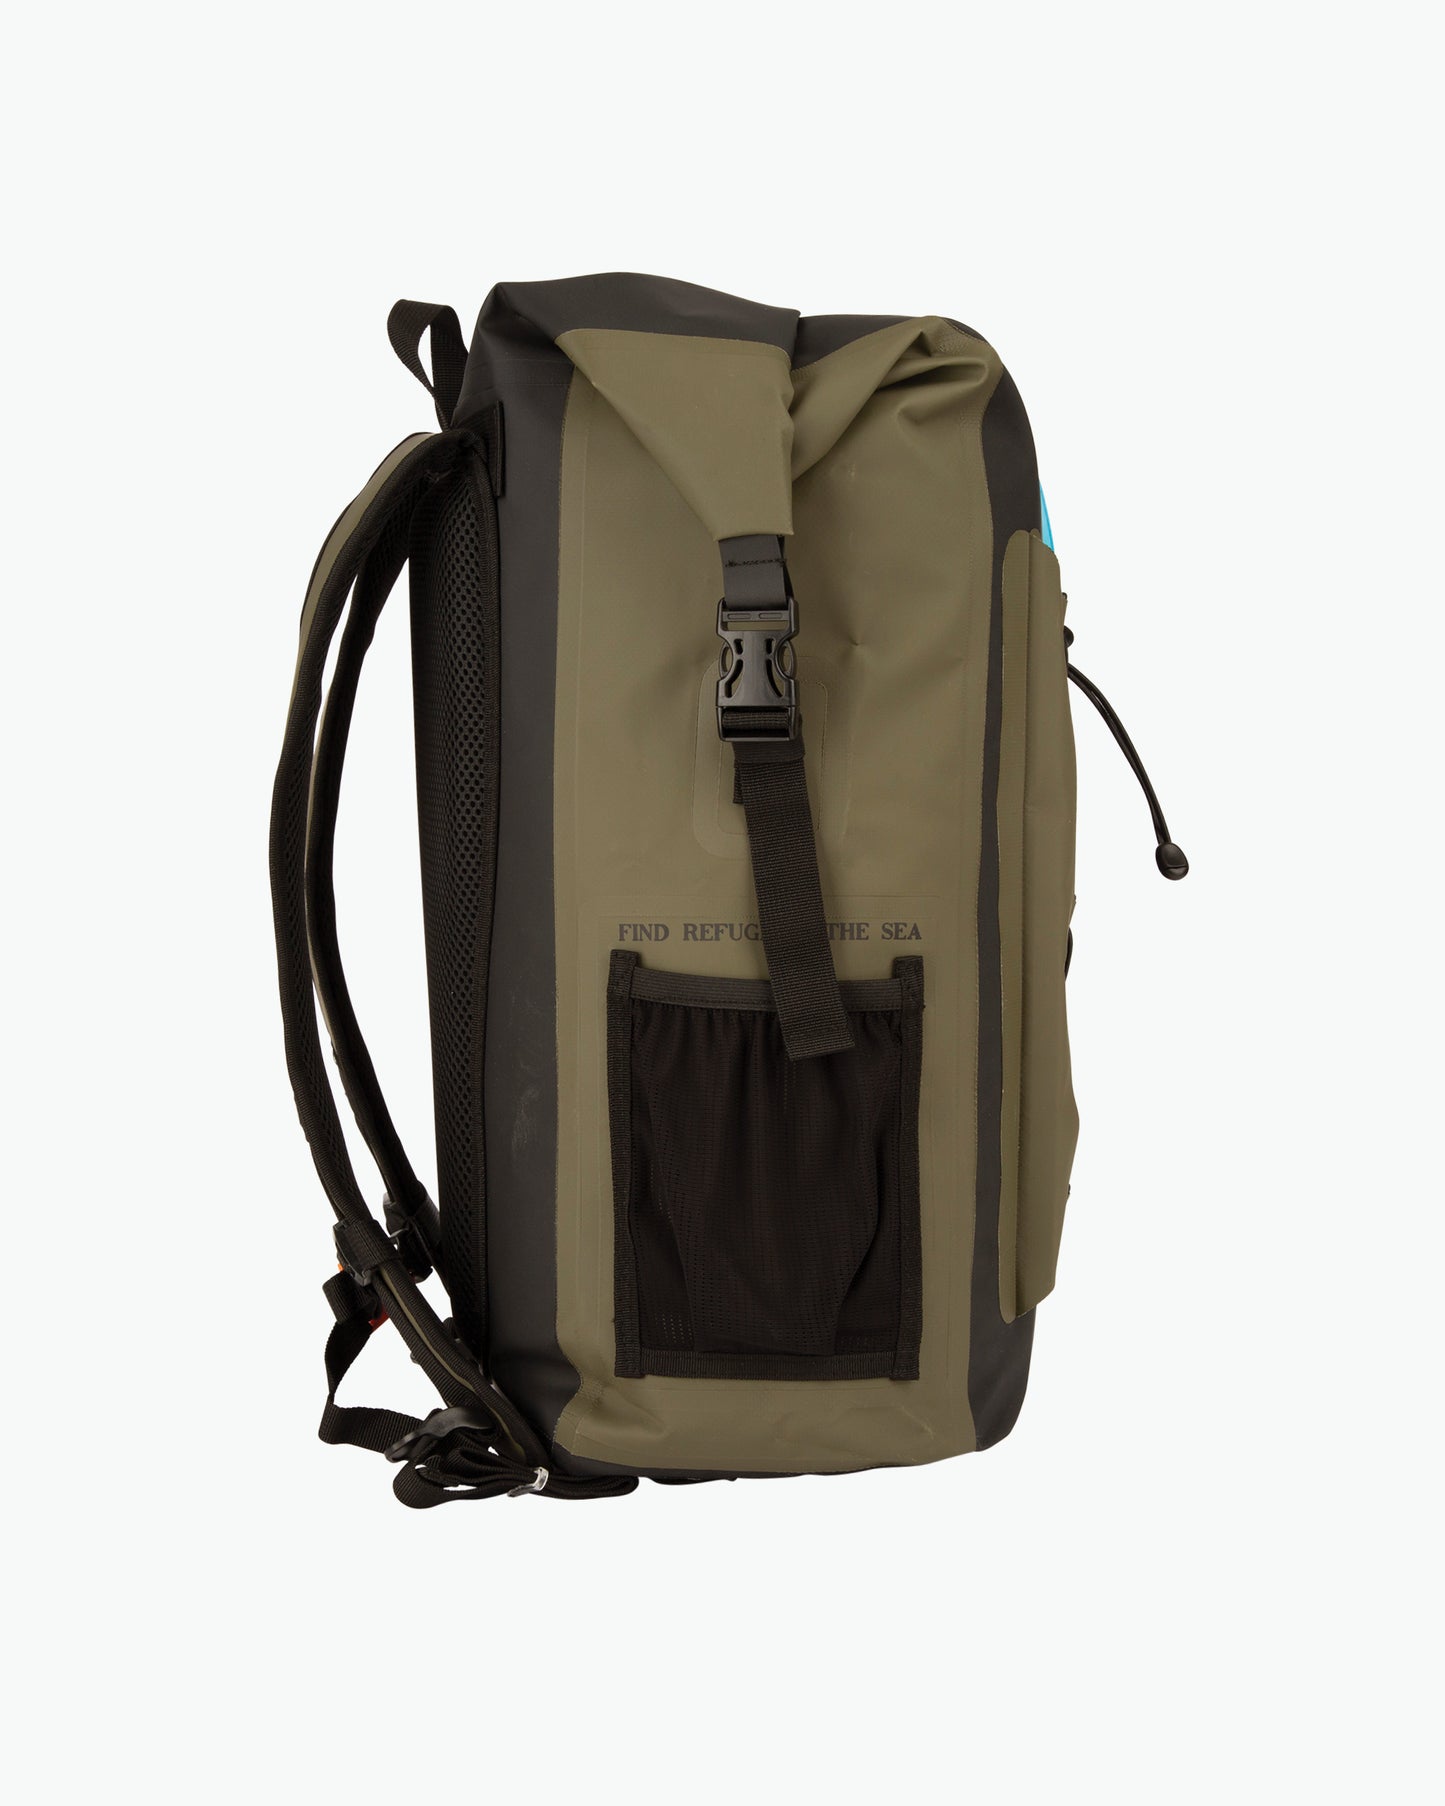 Voyager Black/Military Roll Top Backpack